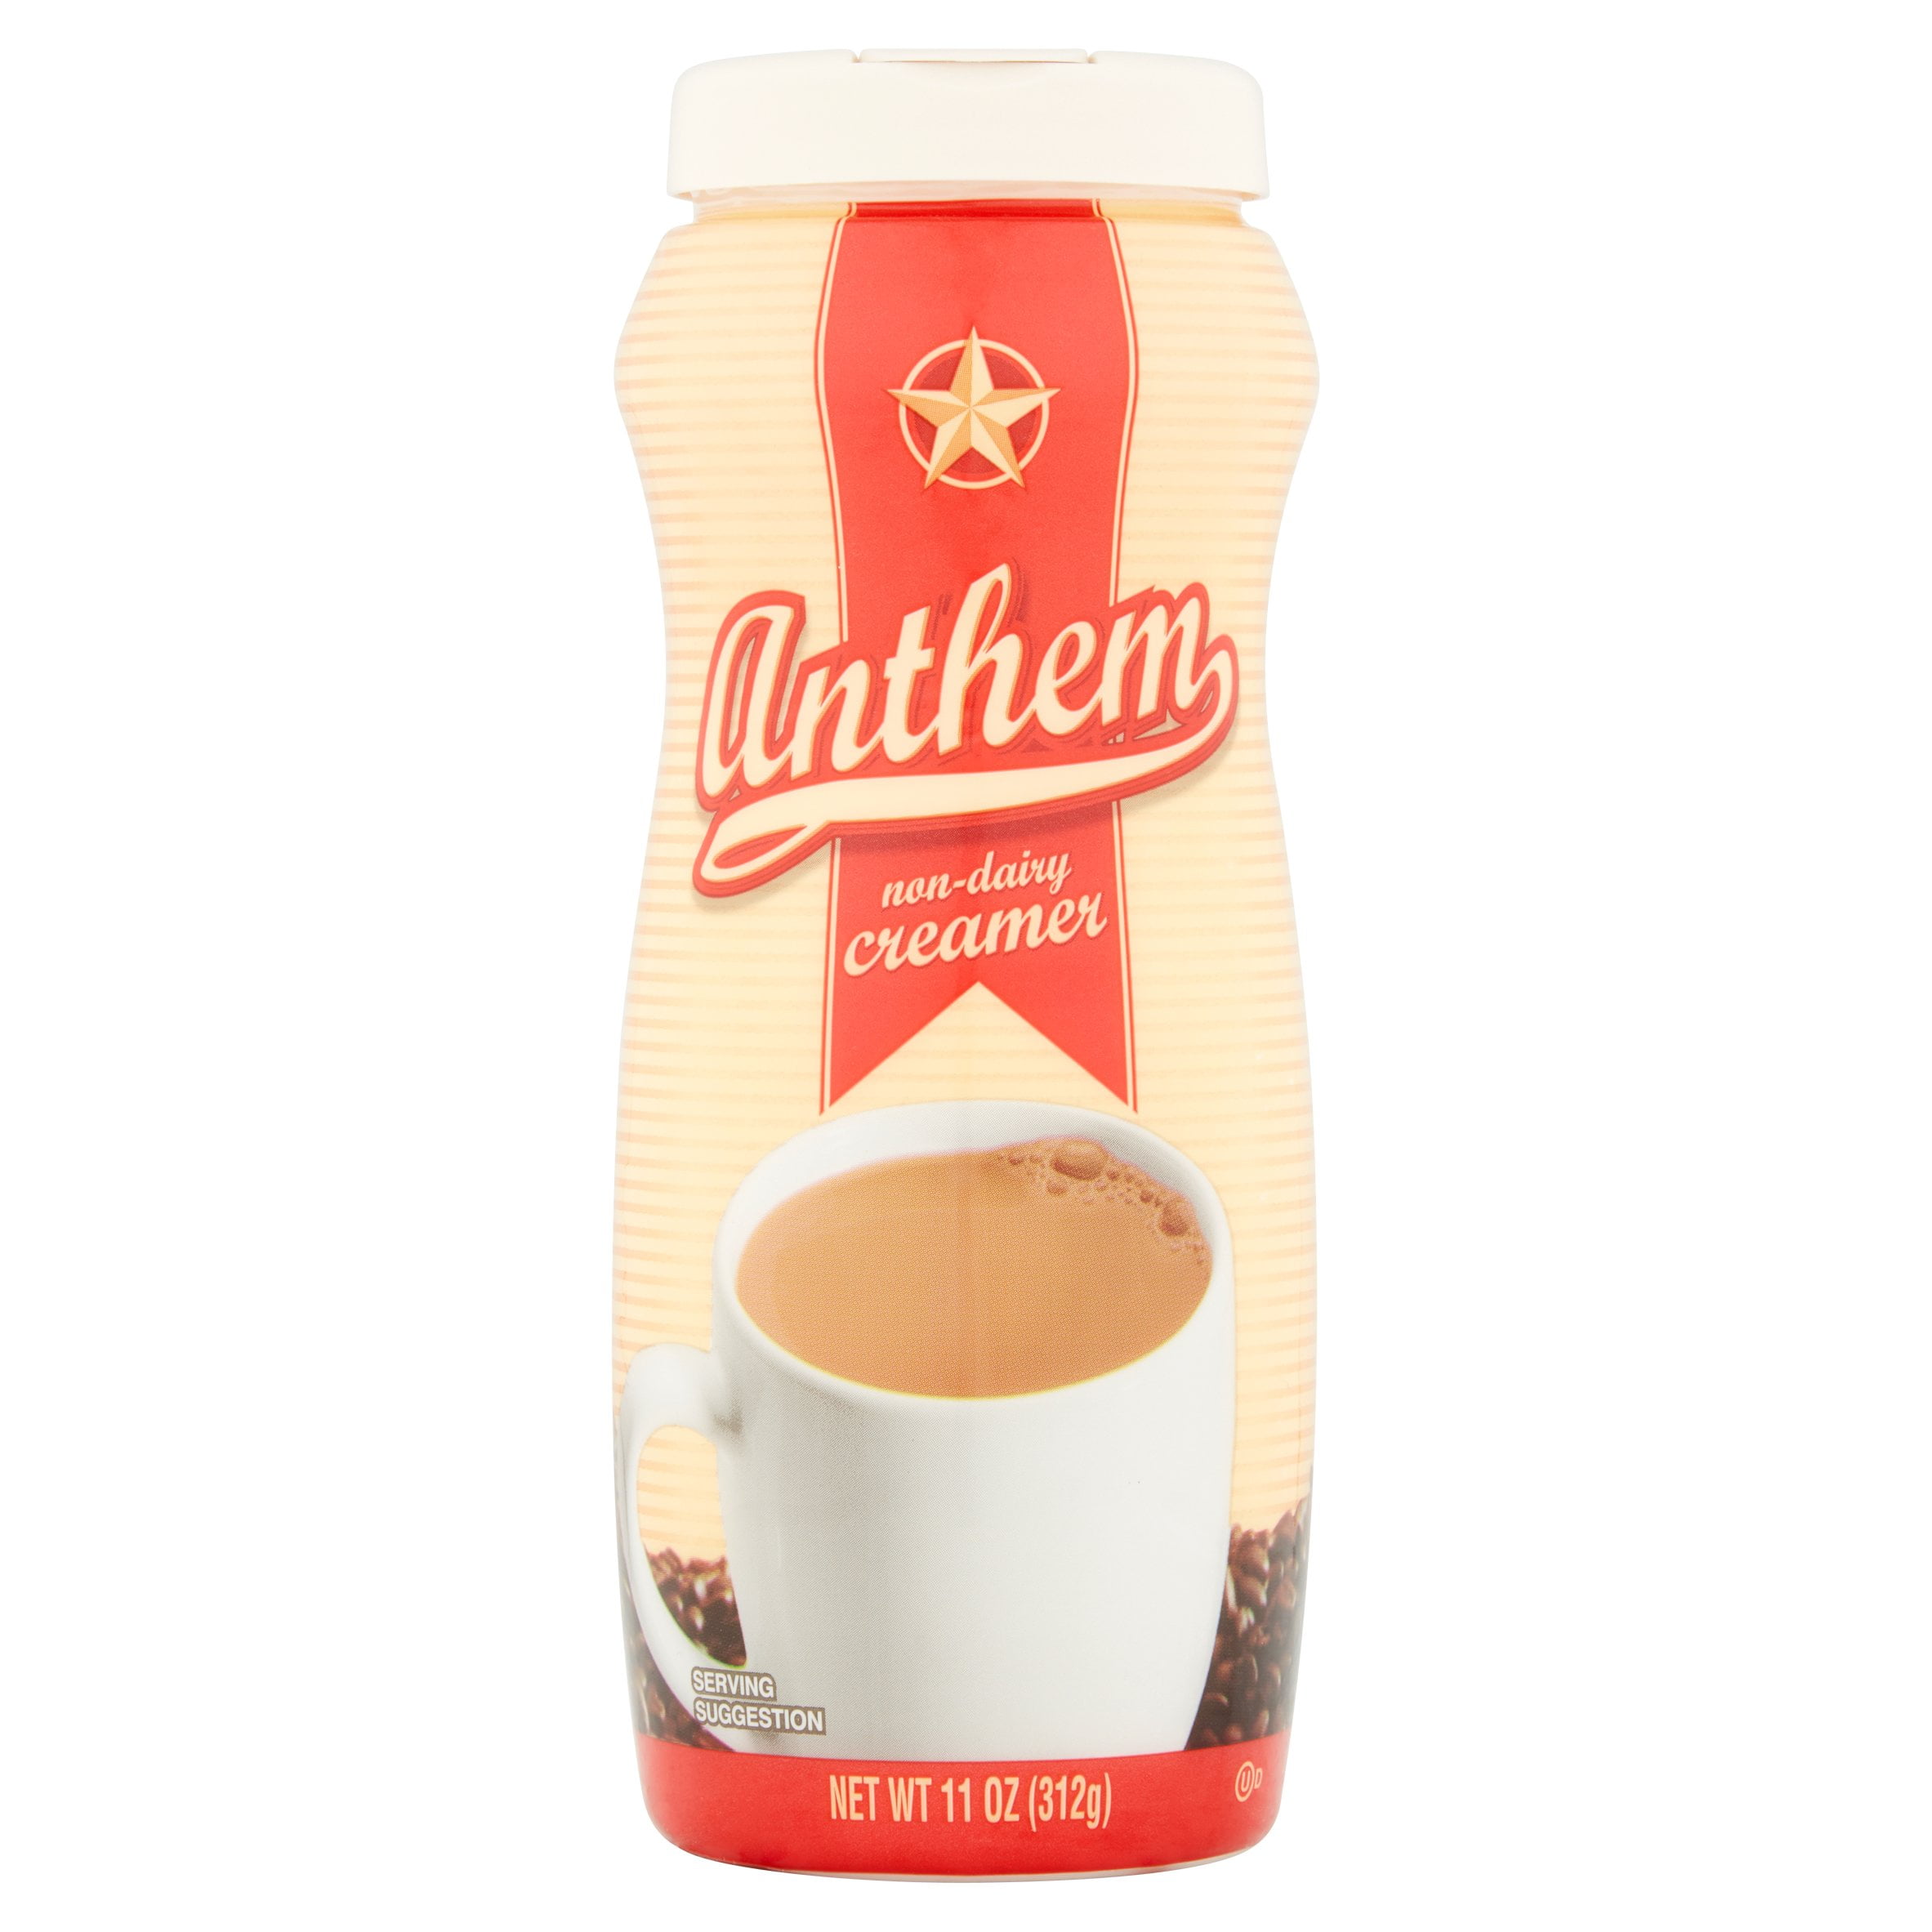 What is nondairy creamer made of?